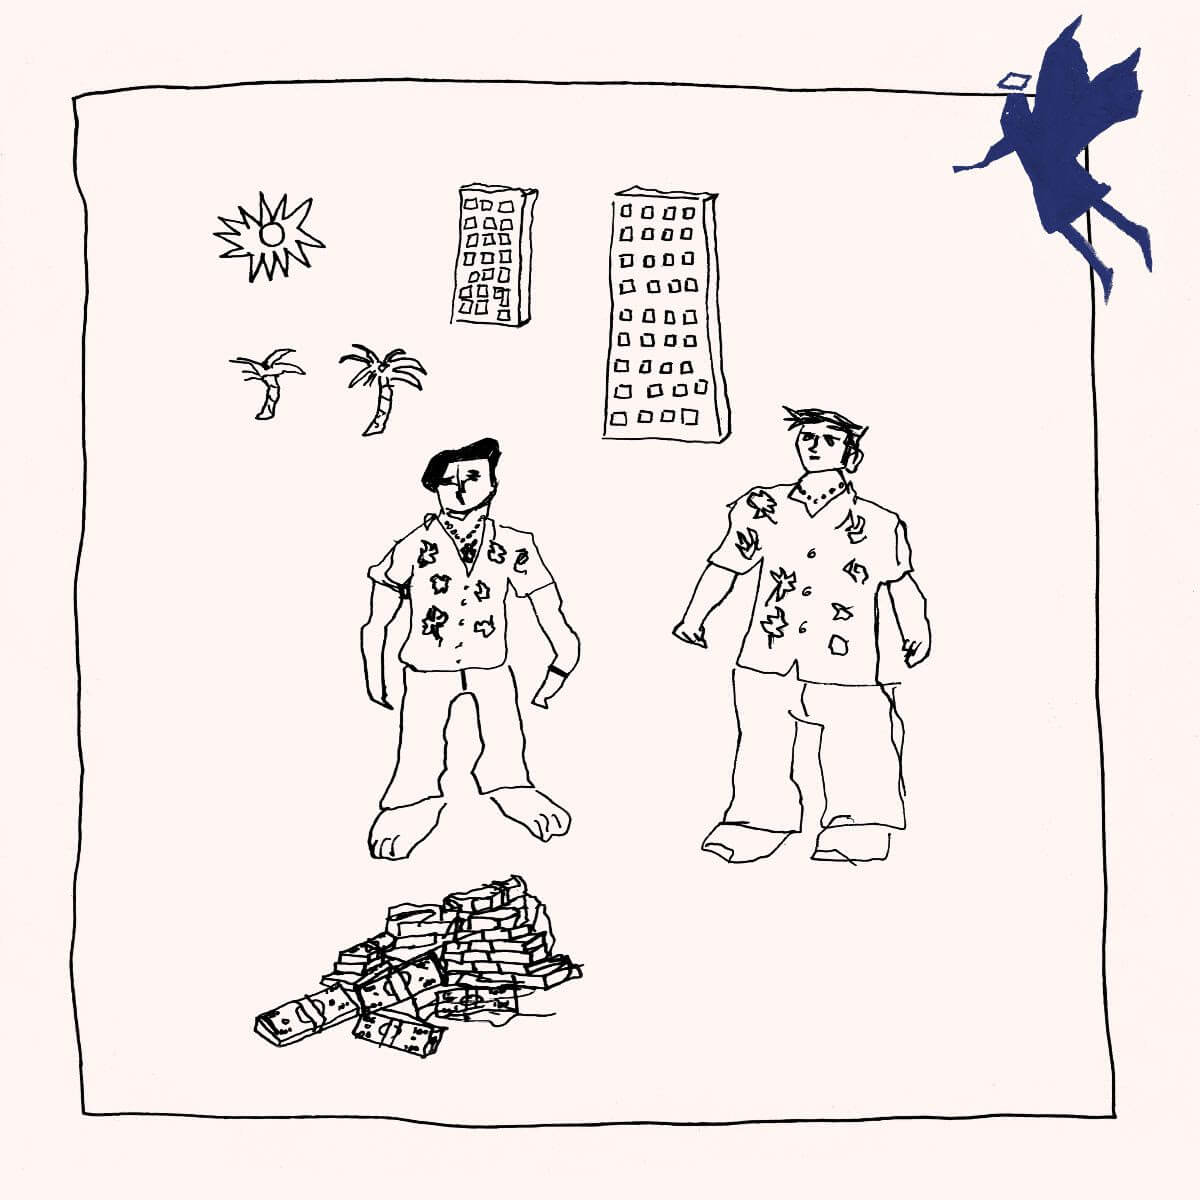 Heartbreak Rules by Horse Jumper of Love album review by Erin MacLeod for Northern Transmissions